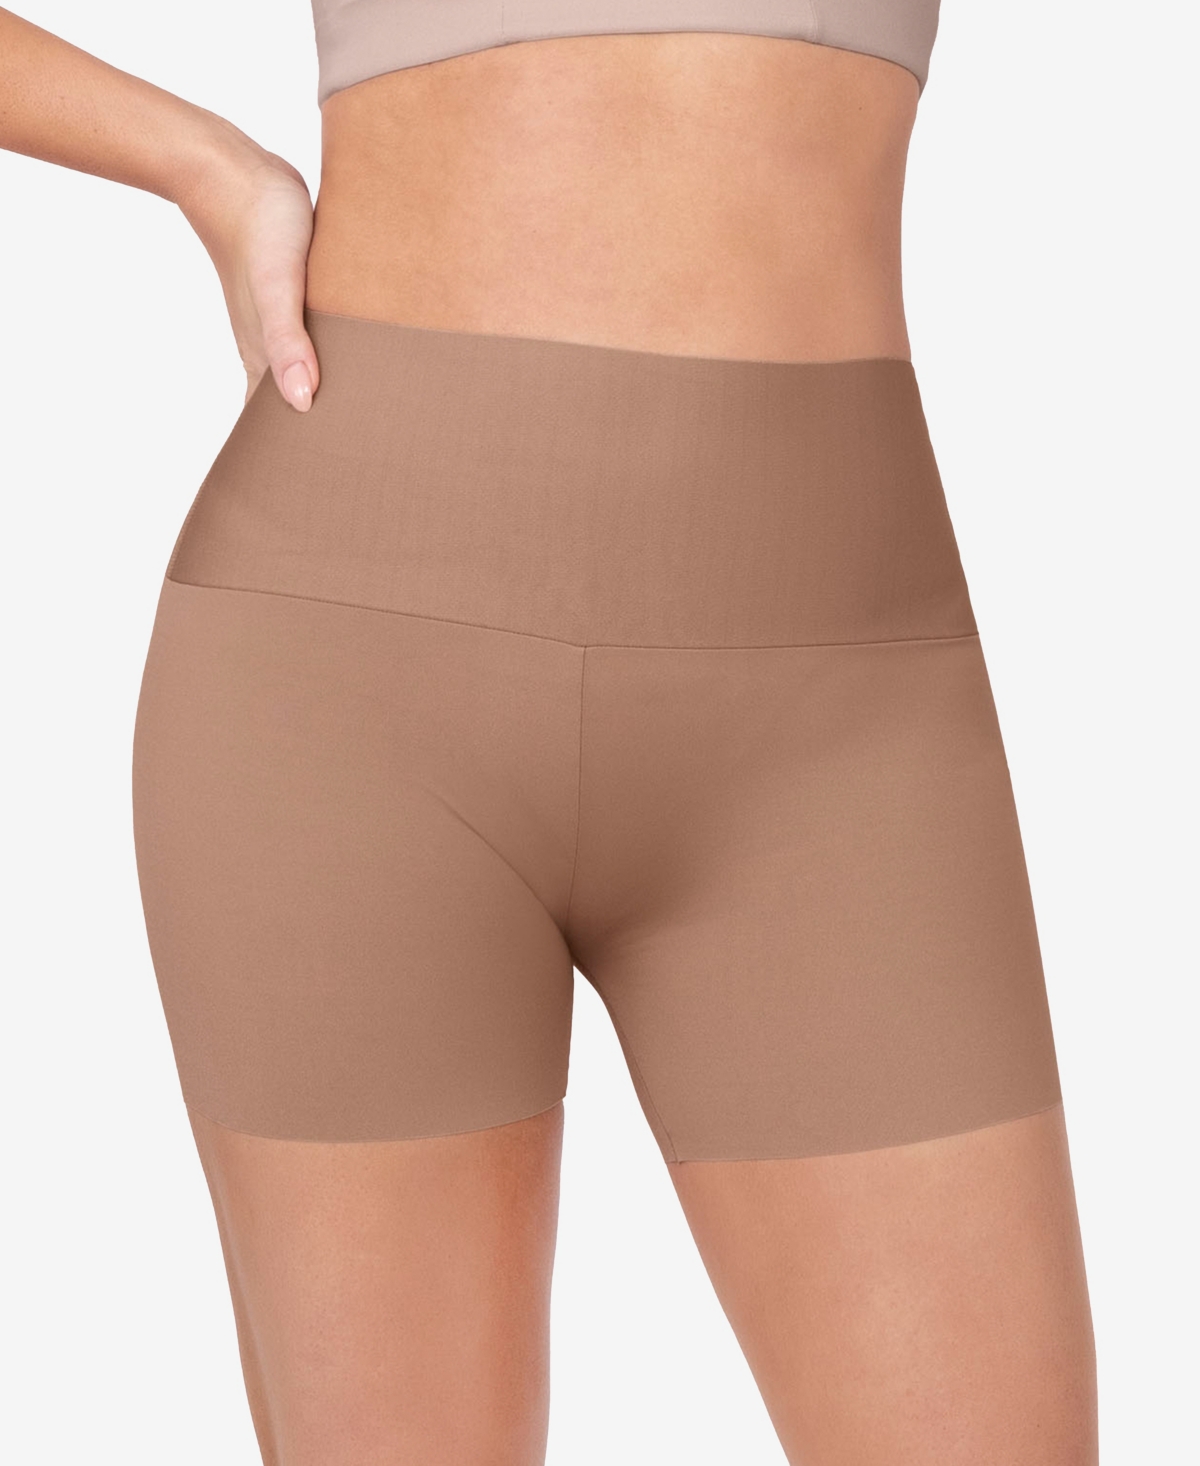 Women's Stay-In-Place Seamless Slip Shorts - Brown